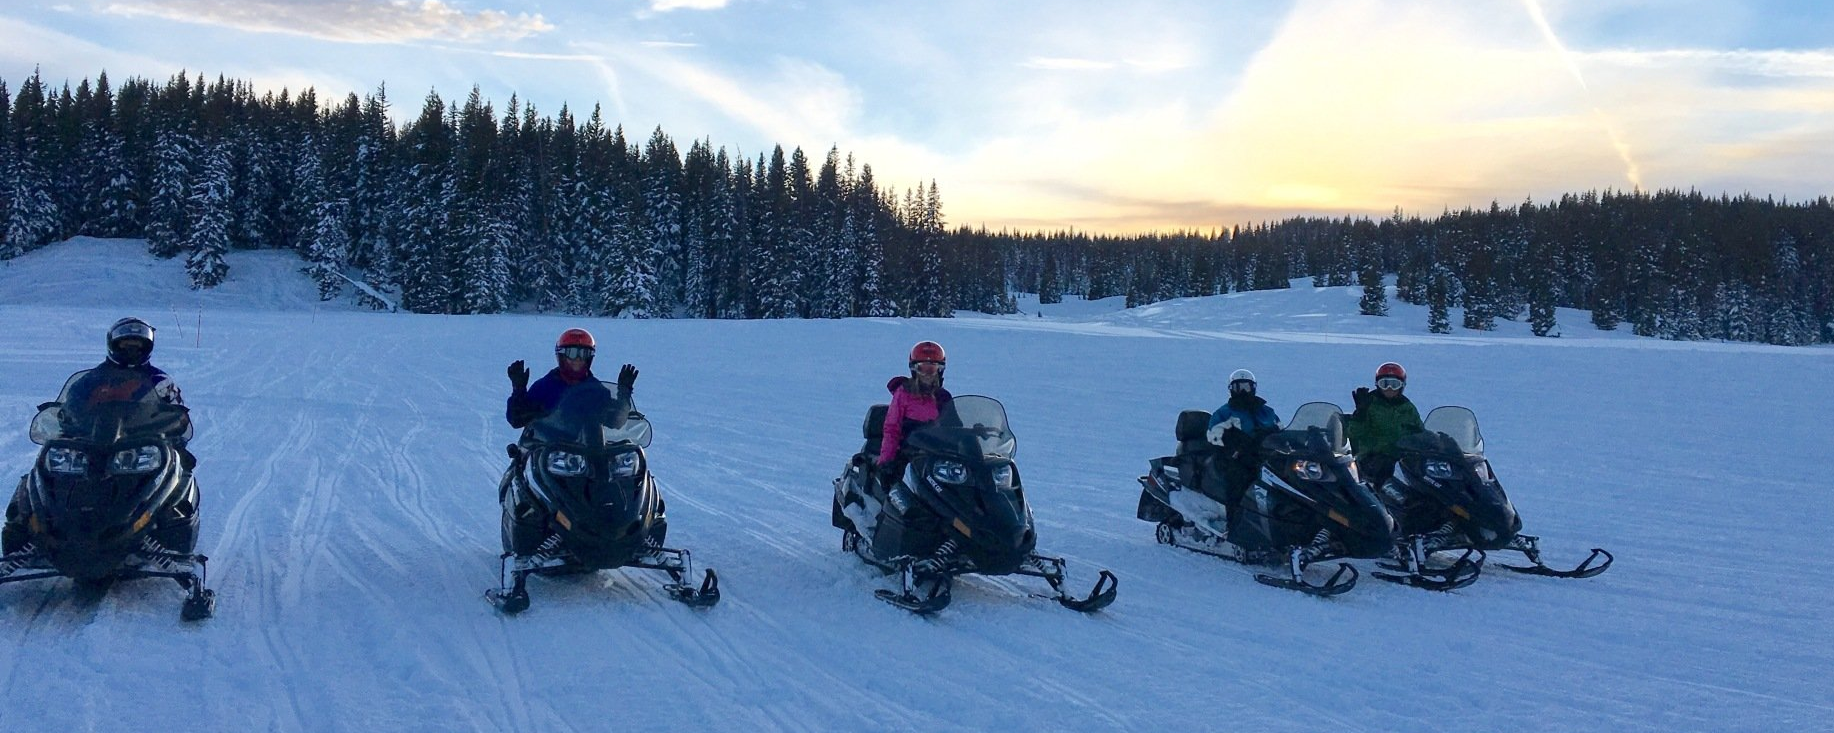 Snowmobiling the Back Country